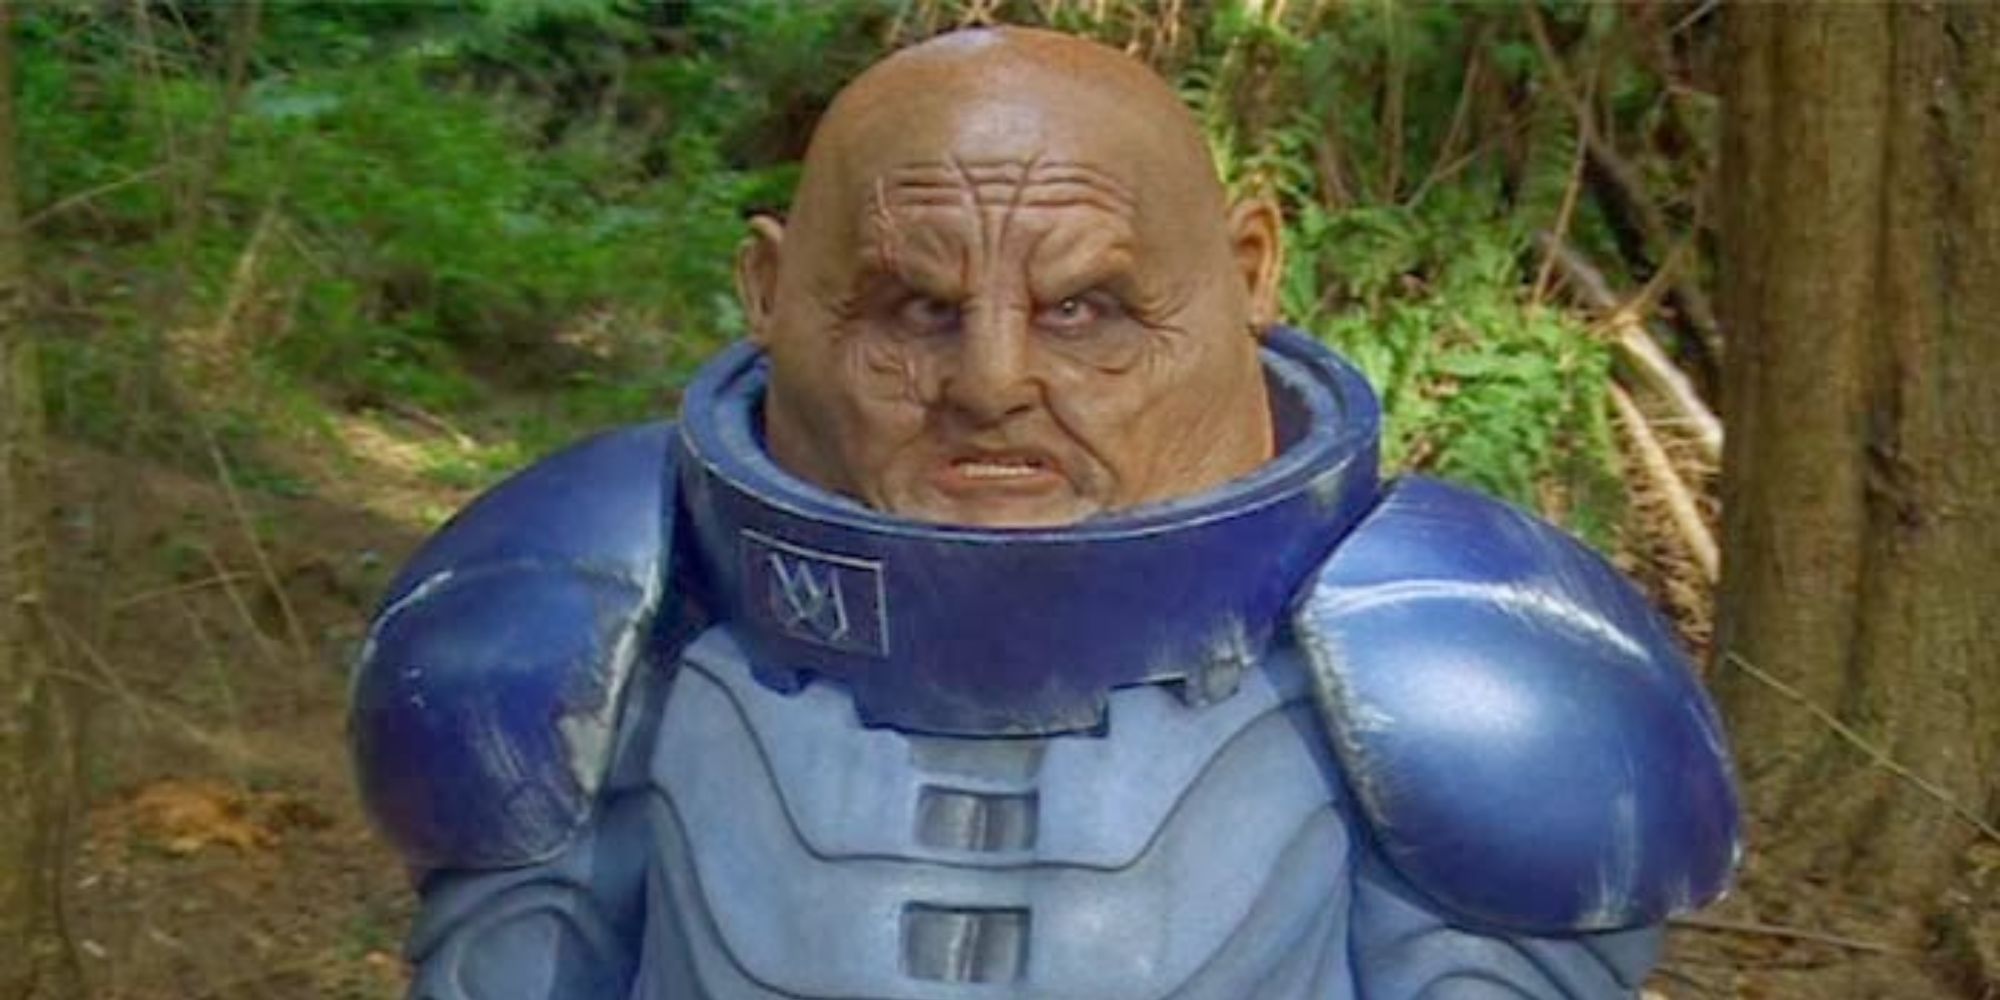 A rounded-creature in blue armor